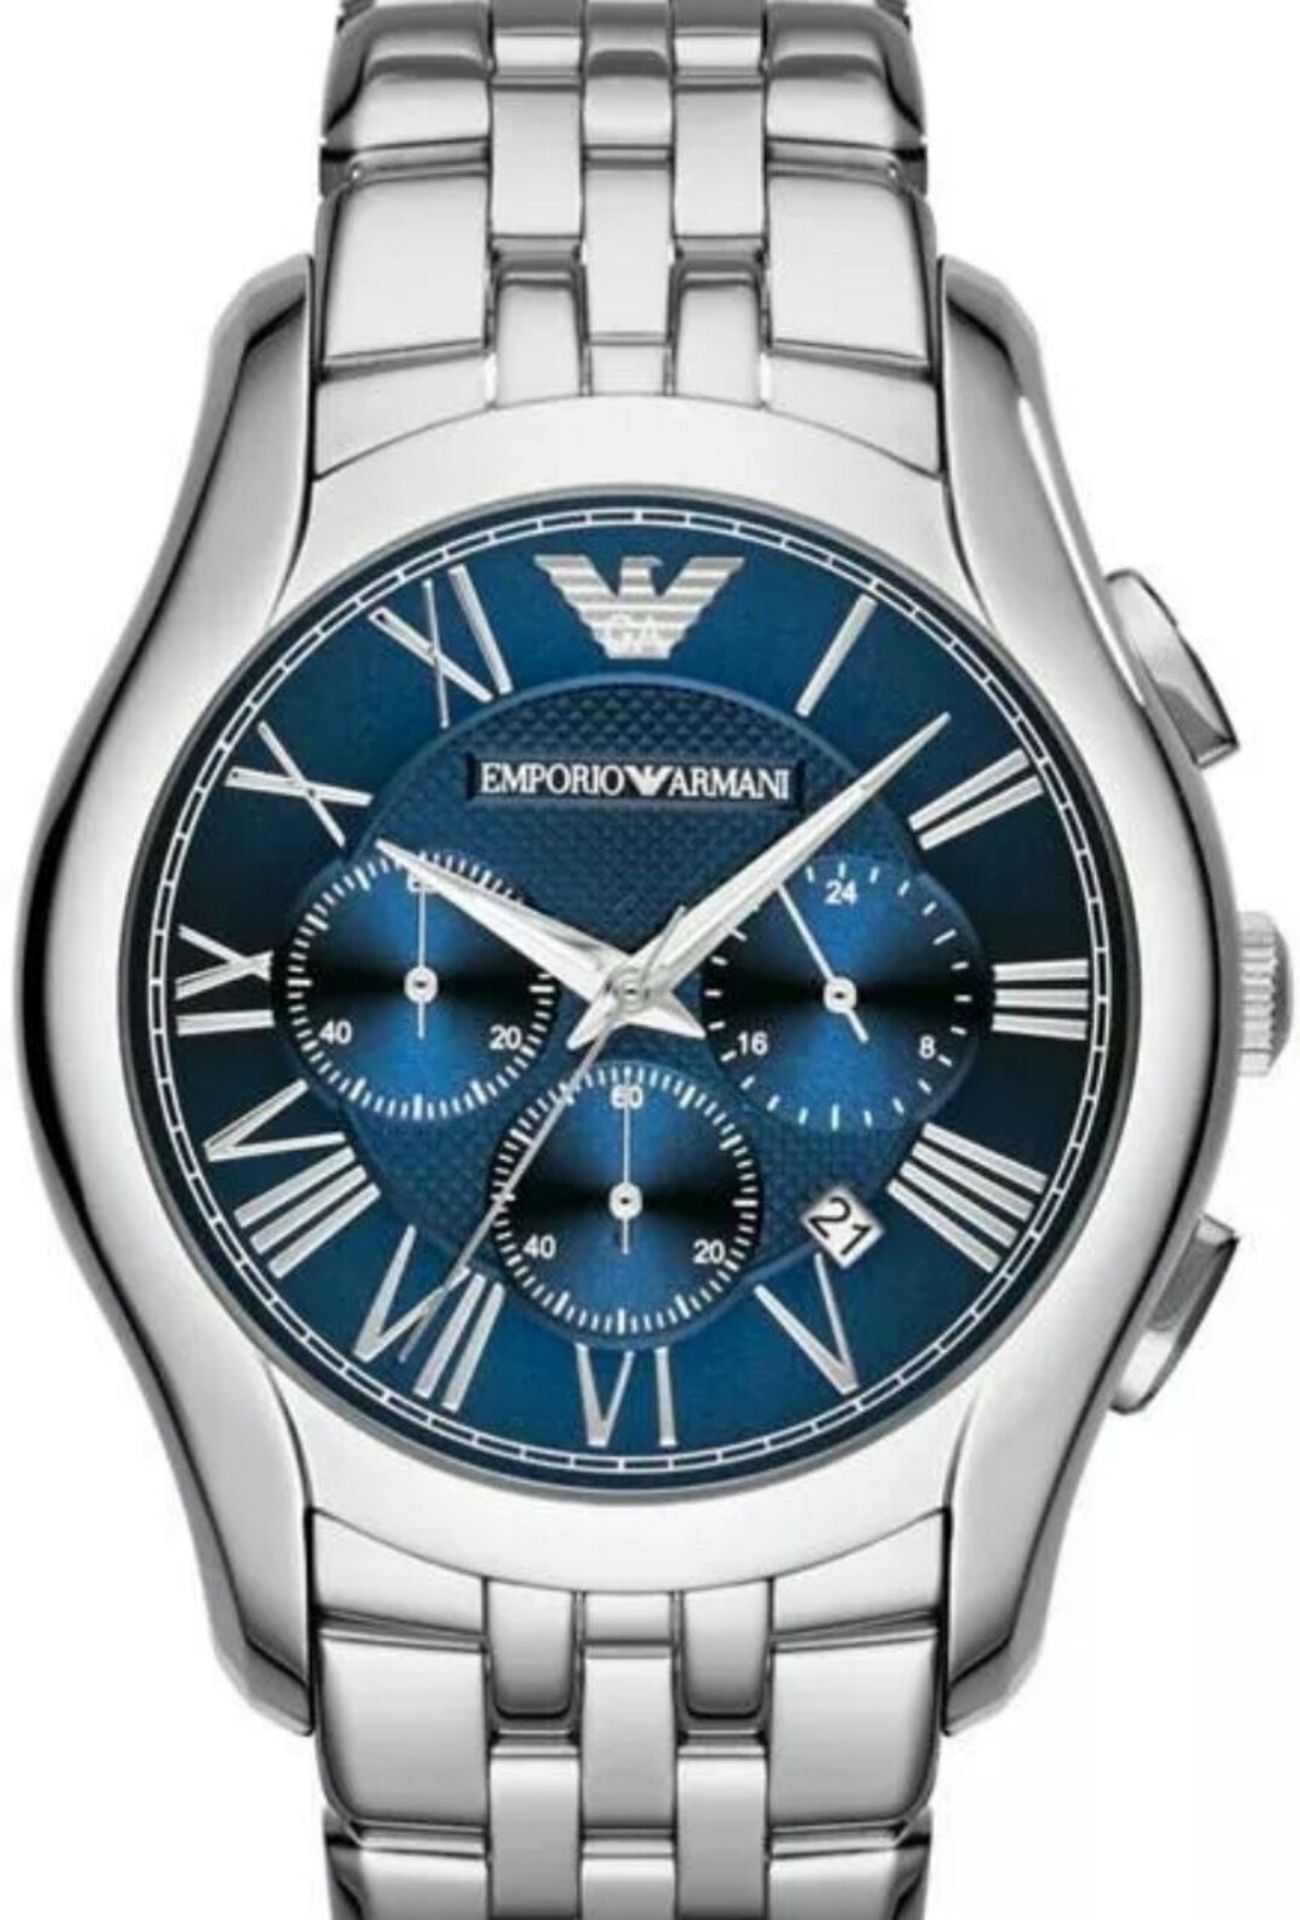 BRAND NEW GENTS EMPORIO ARMANI AR1787, SILVER BRACELET WATCH WITH ARMANI WATCH BOXES, MANUAL &